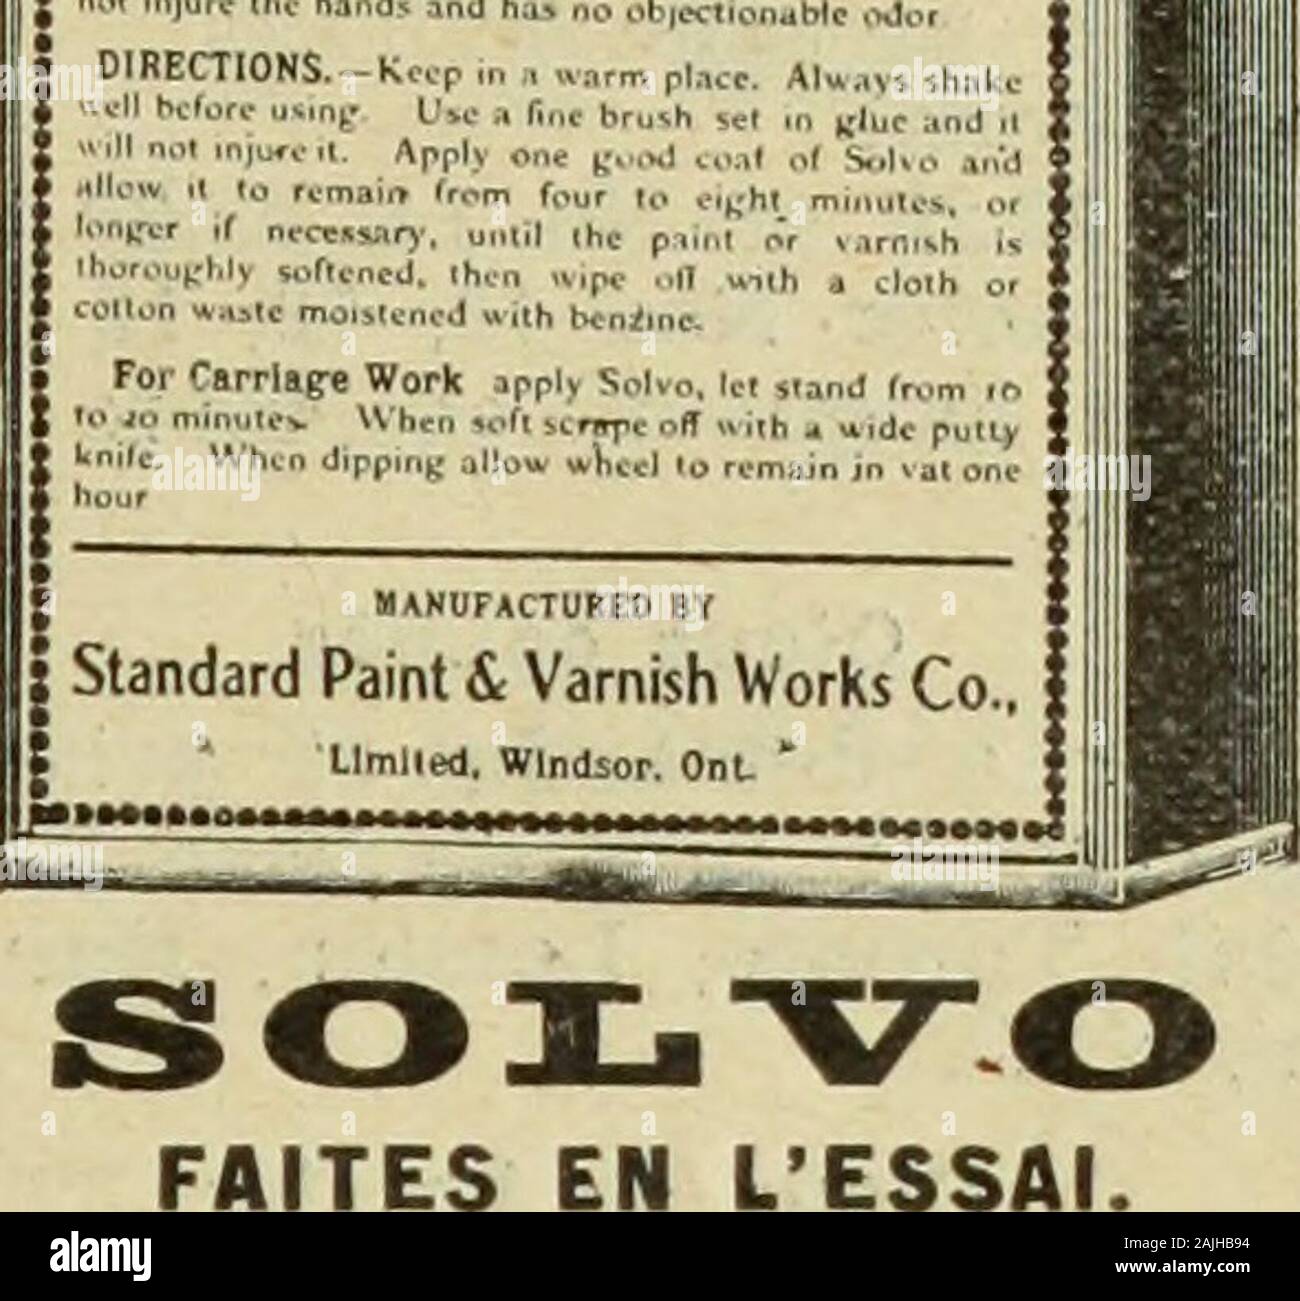 Le quincaillier (Juillet-Decembre 1905) . SOOILriT;^ I A Paint and Varnish Remover. The Quickest, the Host Convenient andthe Best Manufactured. SOLVO ill iilmmi mstanlly remove Piml Shdl.icF,.....&gt;.l .., Va.n.^h f(f.m Iron. MeUl. Eurih»r,u,,r,..^.|.,..,„ Wood, or aoj, painted or i-arnu.hed ,.ir(,nc ?M&gt;..,1 hiji t«uvcs ihc furfacv perfectly waootb nud m^ i5 iri|;(ii;il tiiirtliliiin. snJall rtrady (or refinUninf;. IlJ, ..v,i,:,„^ n,. WaiLT. Fusel Oil. Alb-ili of Atids, Doc&gt;. FAITES LESSAI. La meilleure preparation pour enlever le vernis et lapeinture. Ne d^colorera pas ni ne nuira au g Stock Photo